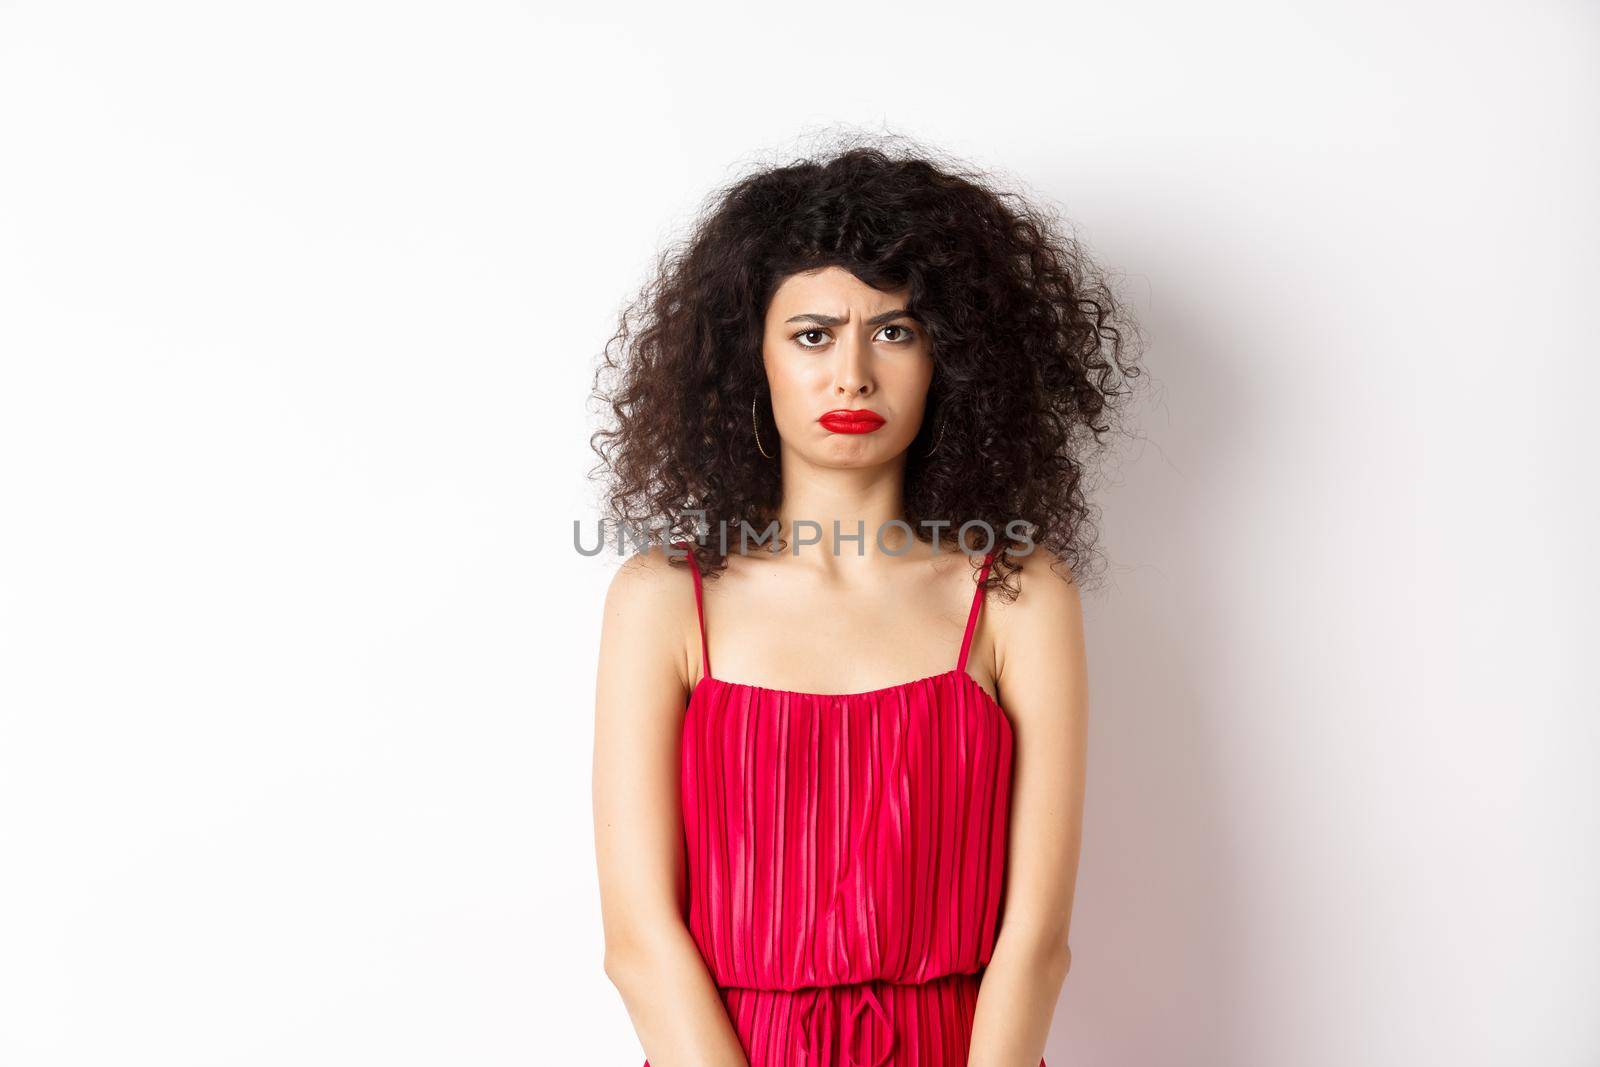 Sad frowning lady in red dress complaining, looking jealous or lonely, standing upset over white background. Copy space